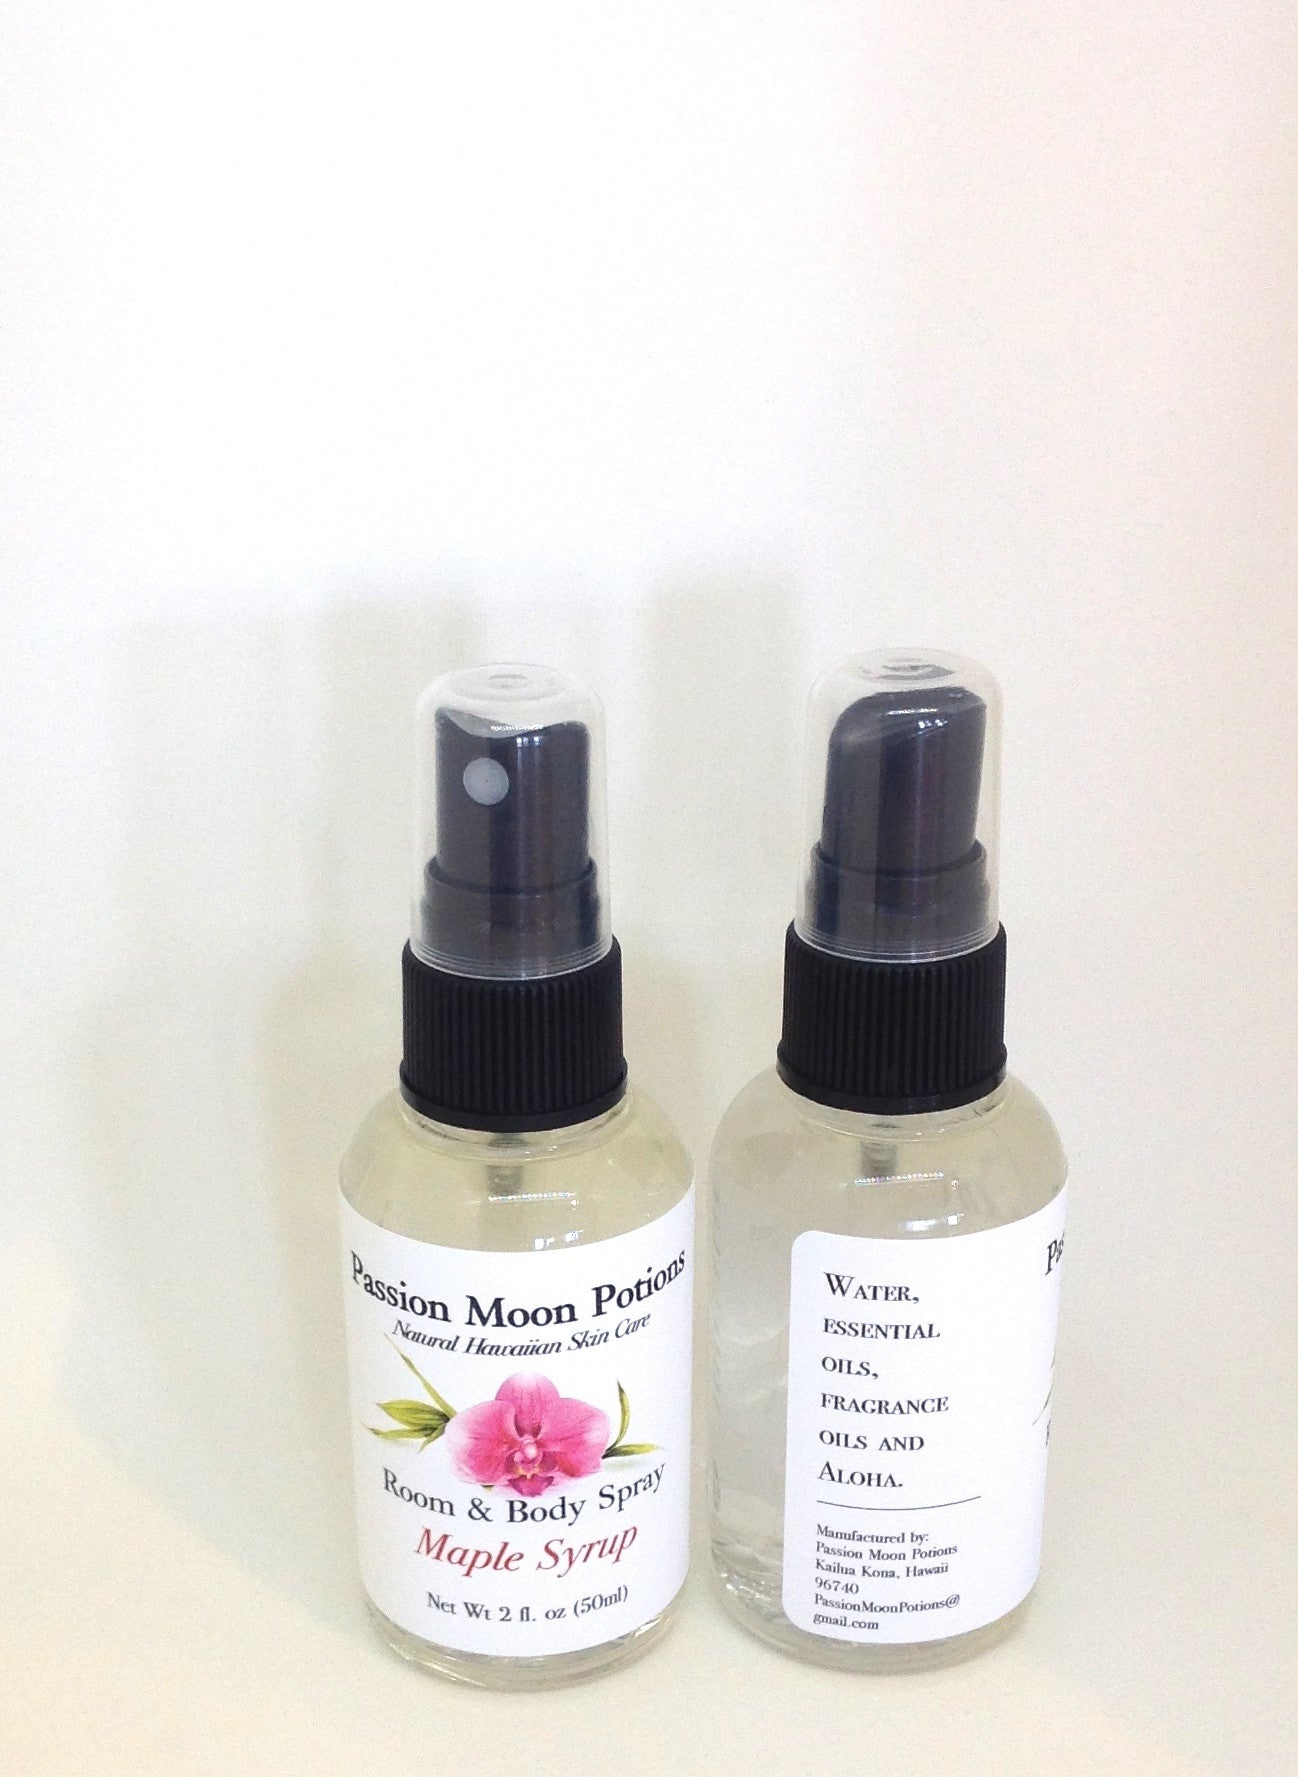 Room and Body Sprays - Passion Moon Potions - 7